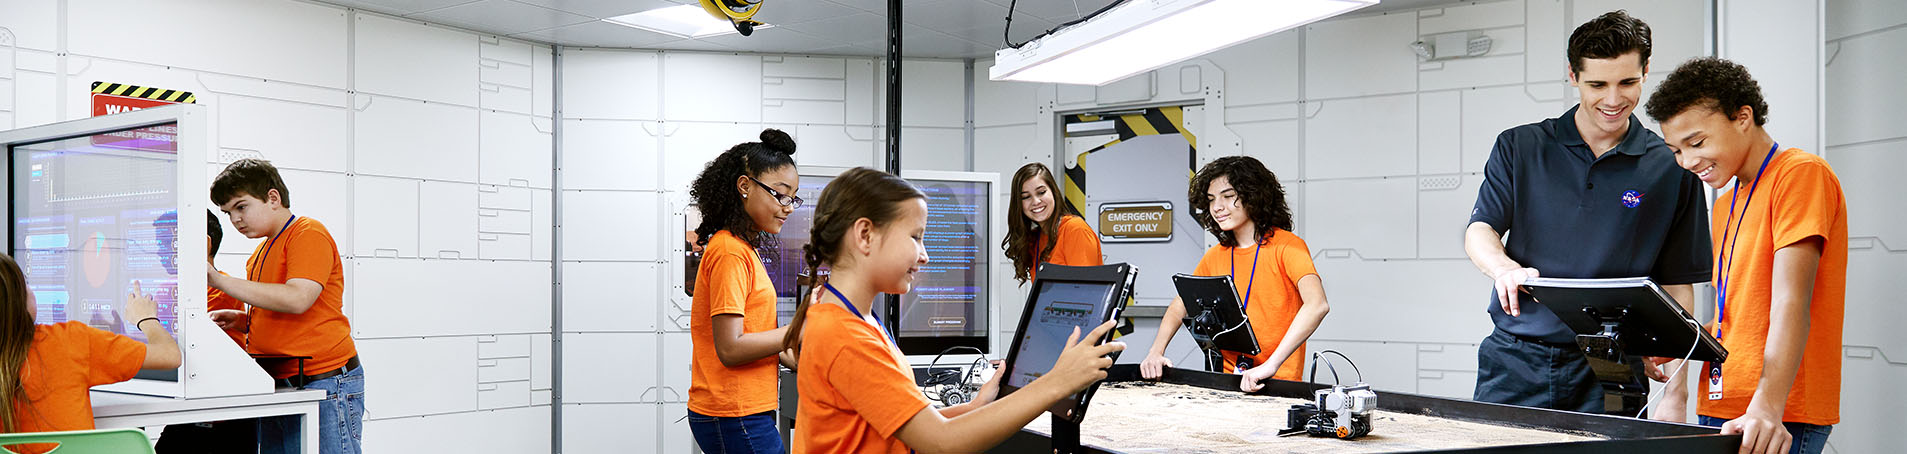 Campers in the Robotics Lab at Camp Kennedy Space Center